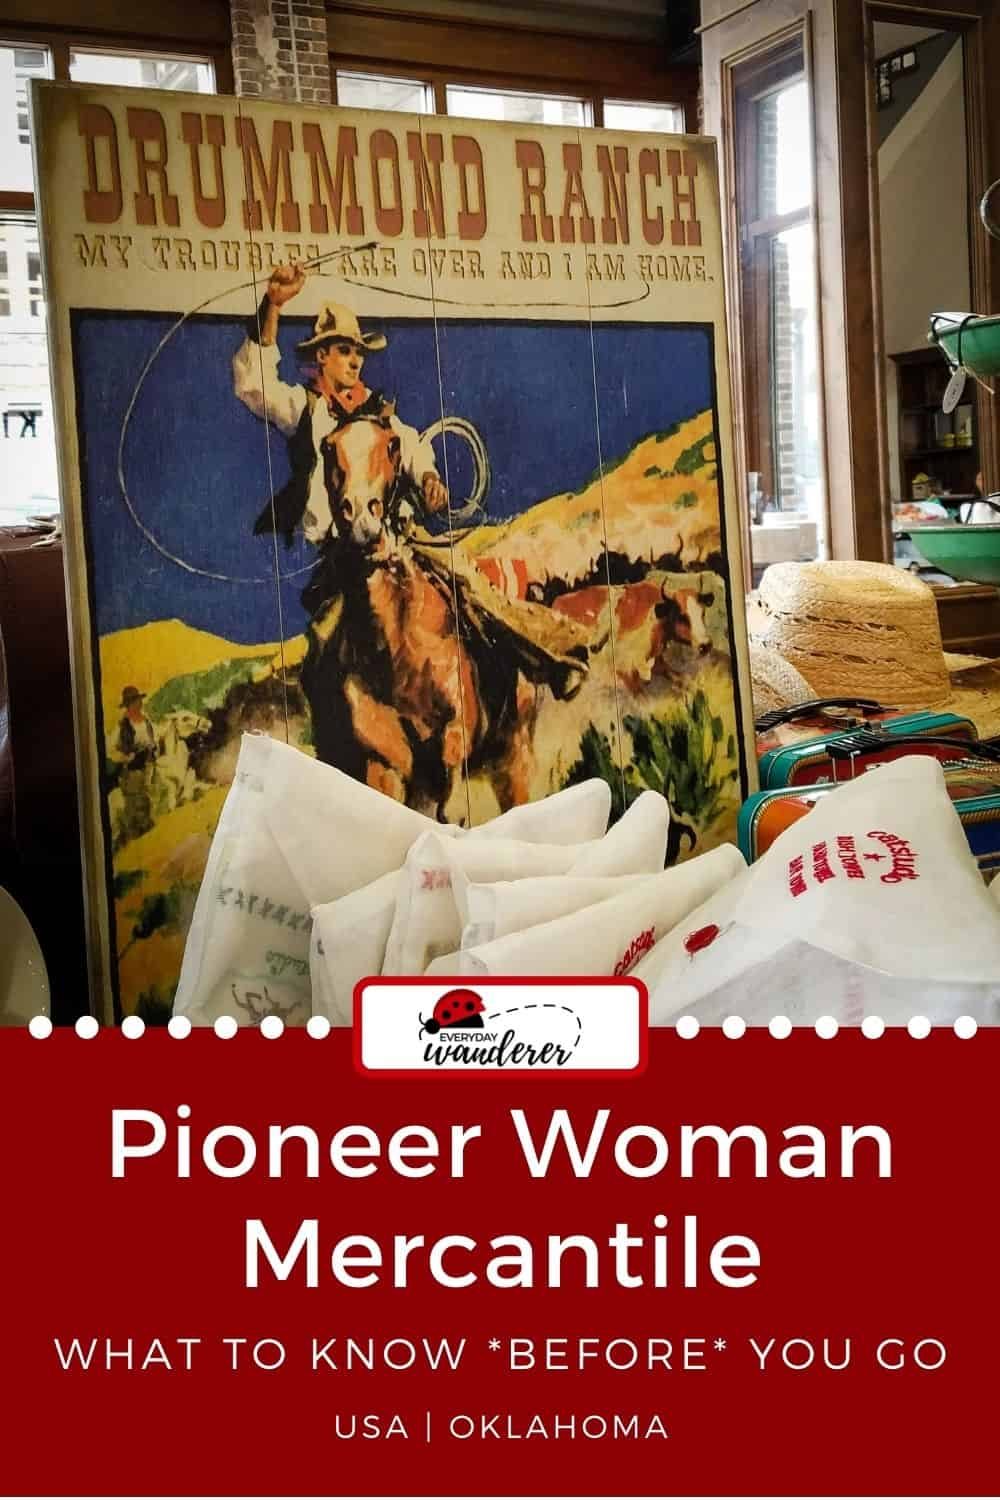 10 Things You Need to Know Before Visiting Pioneer Woman Mercantile - What  to Know About The Merc